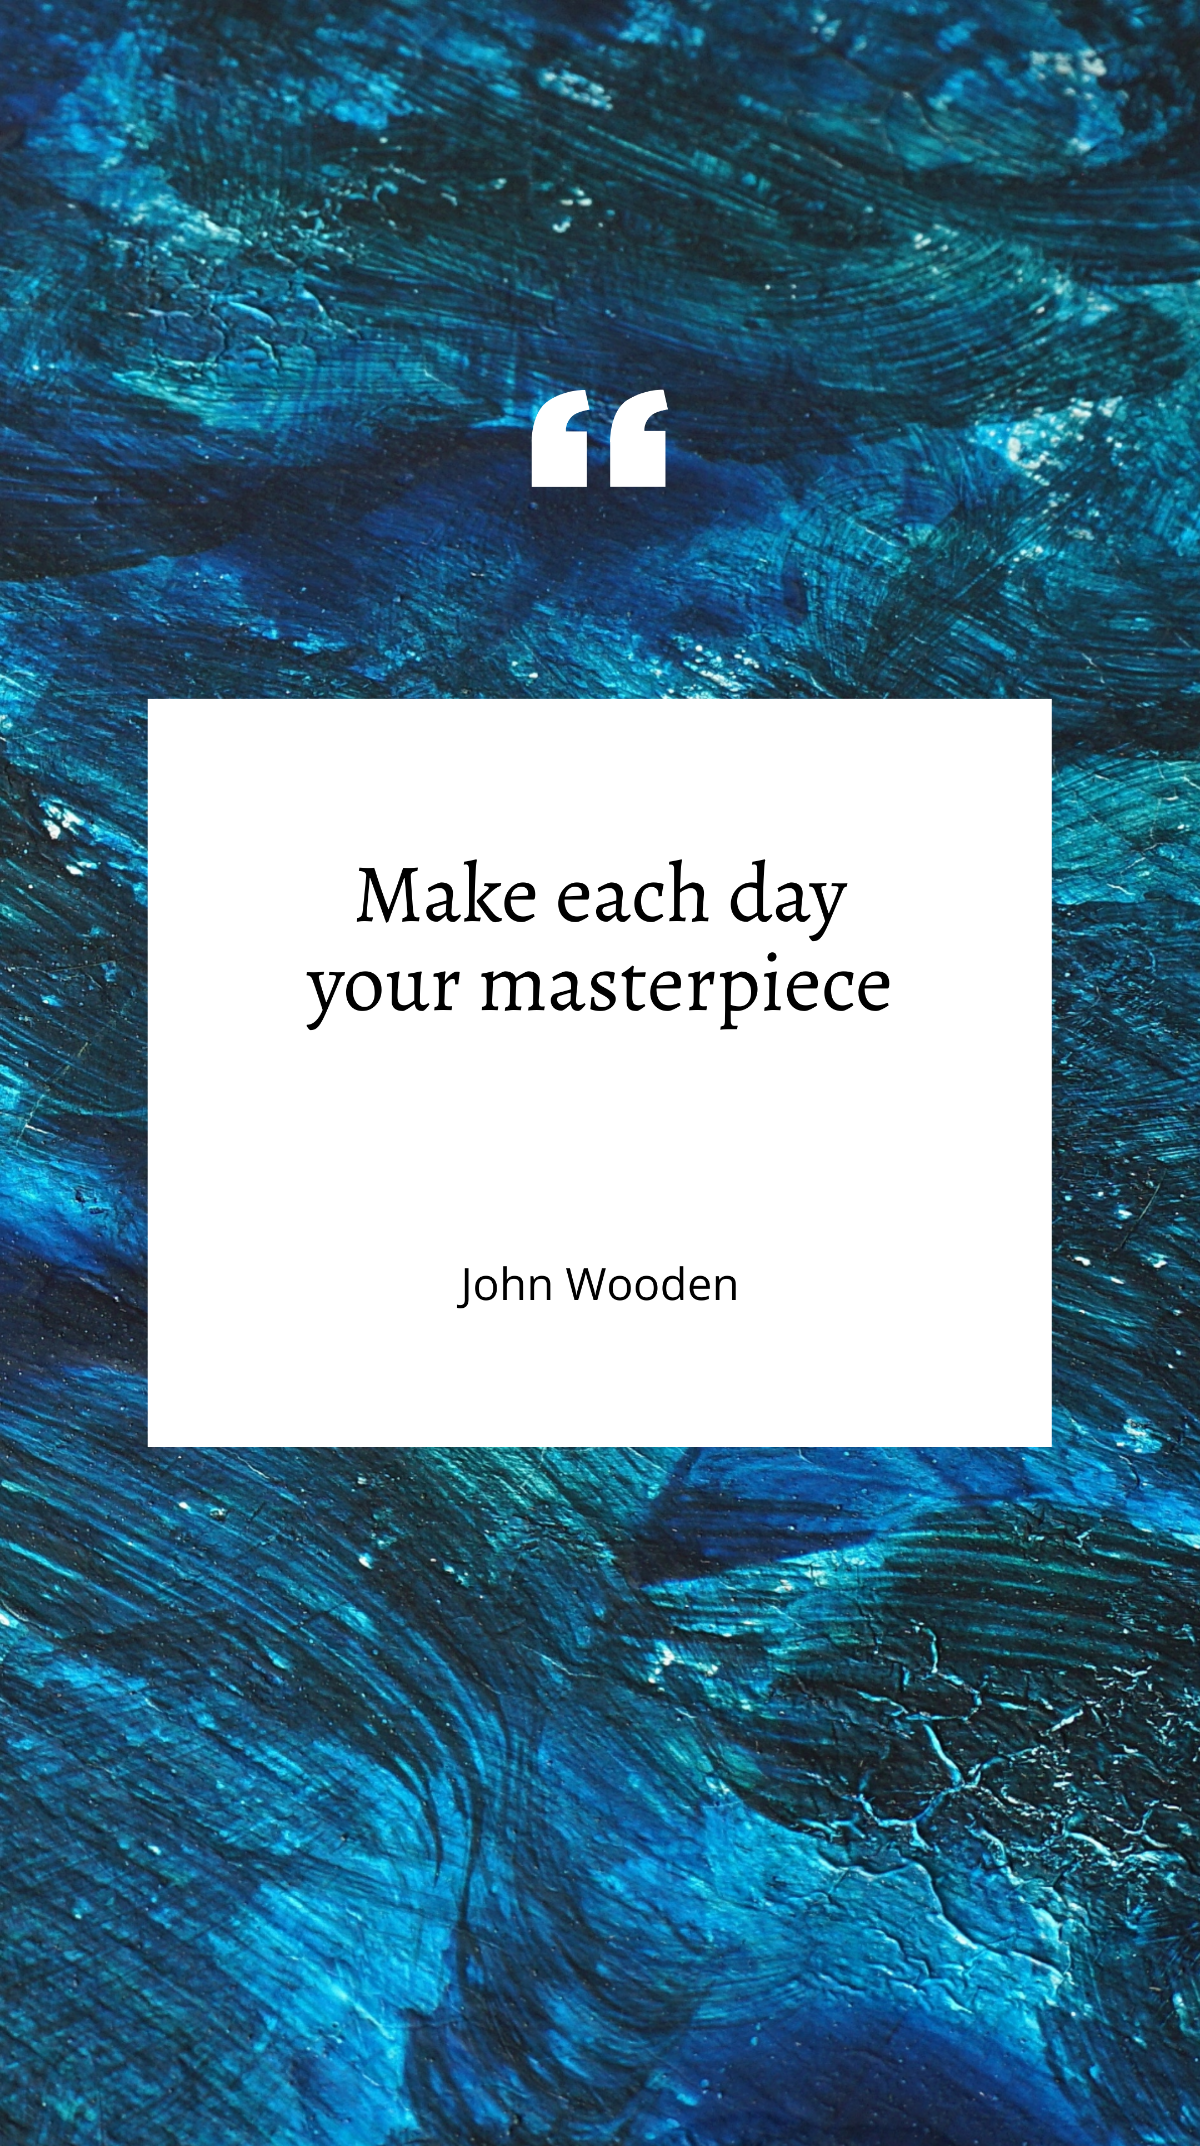 John Wooden - Make each day your masterpiece Template